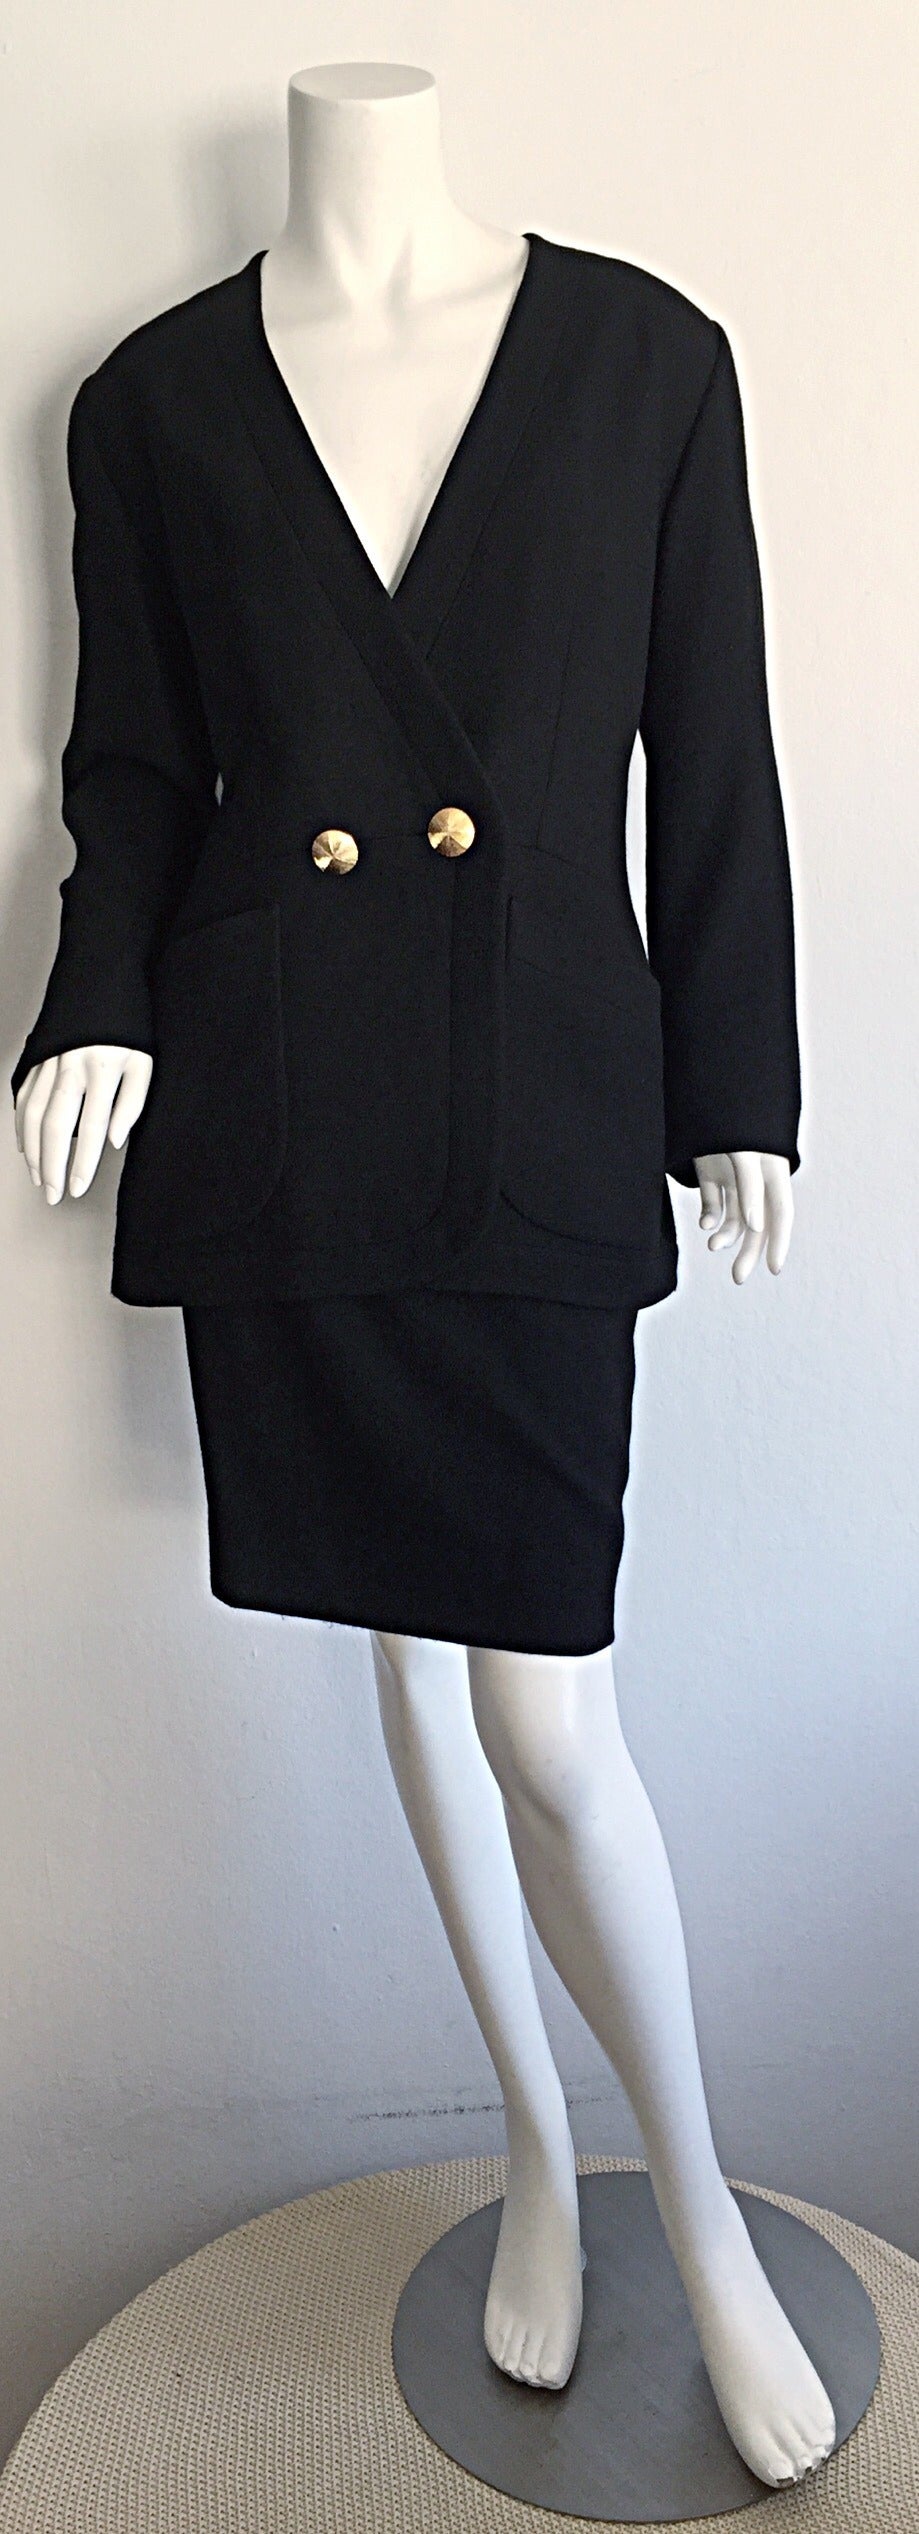 Beautiful vintage Yves Saint Laurent 'Rive Gauche' black skirt suit! Flattering neckline on jacket, with two dome gold buttons at waist, and at cuffs. Also features interior waist button for added closure. High waisted black skirt. A classic and